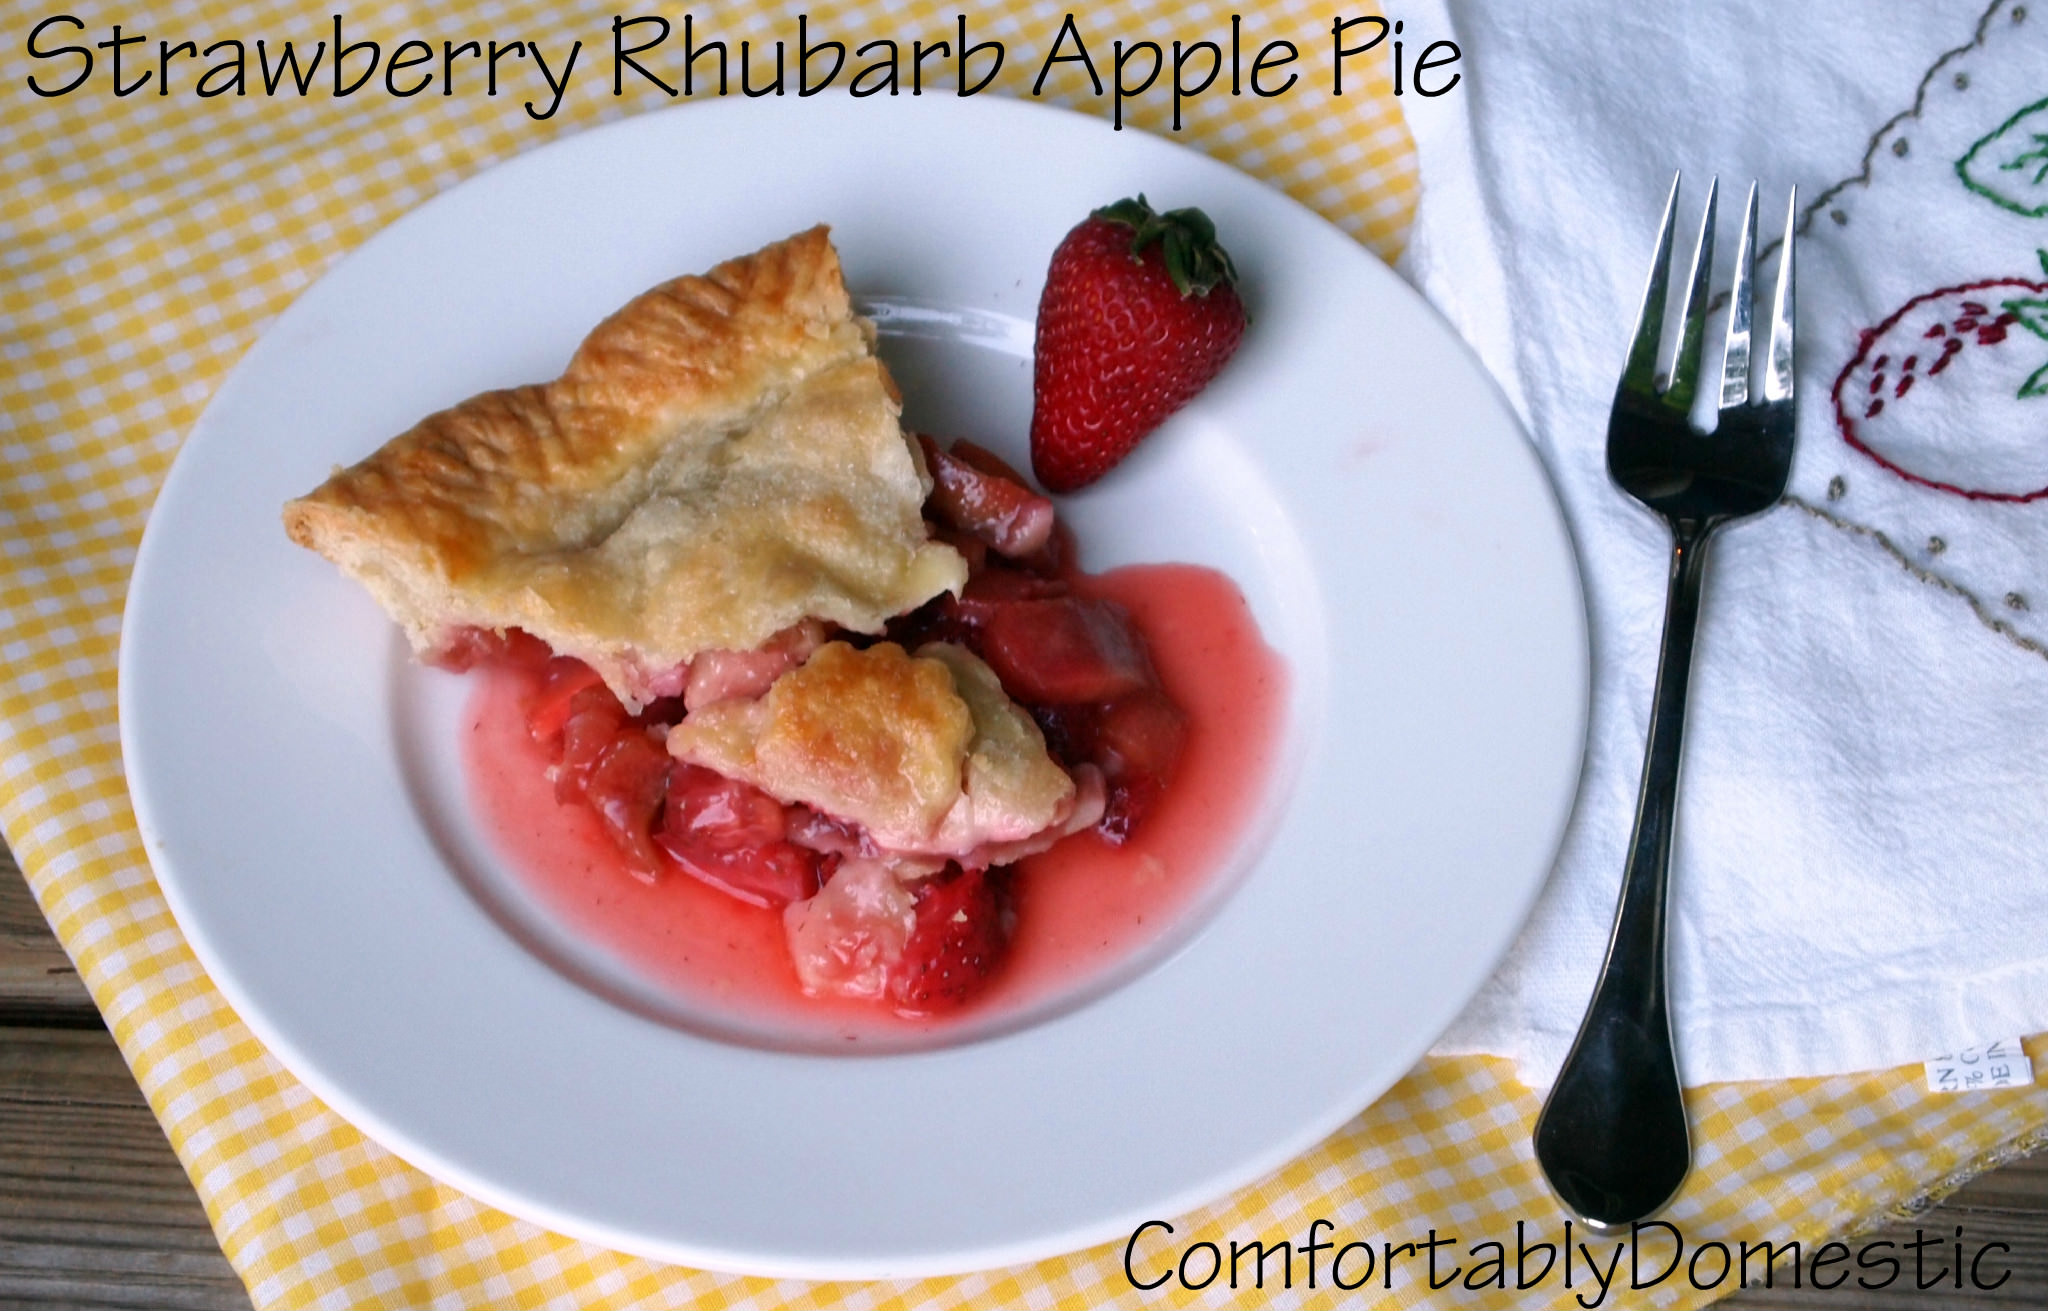 Strawberry rhubarb apple pie bakes fresh strawberries, rhubarb, and apples into a tender, buttery crust. The perfect trio of flavors for a spectacular dessert! | ComfortablyDomestic.com